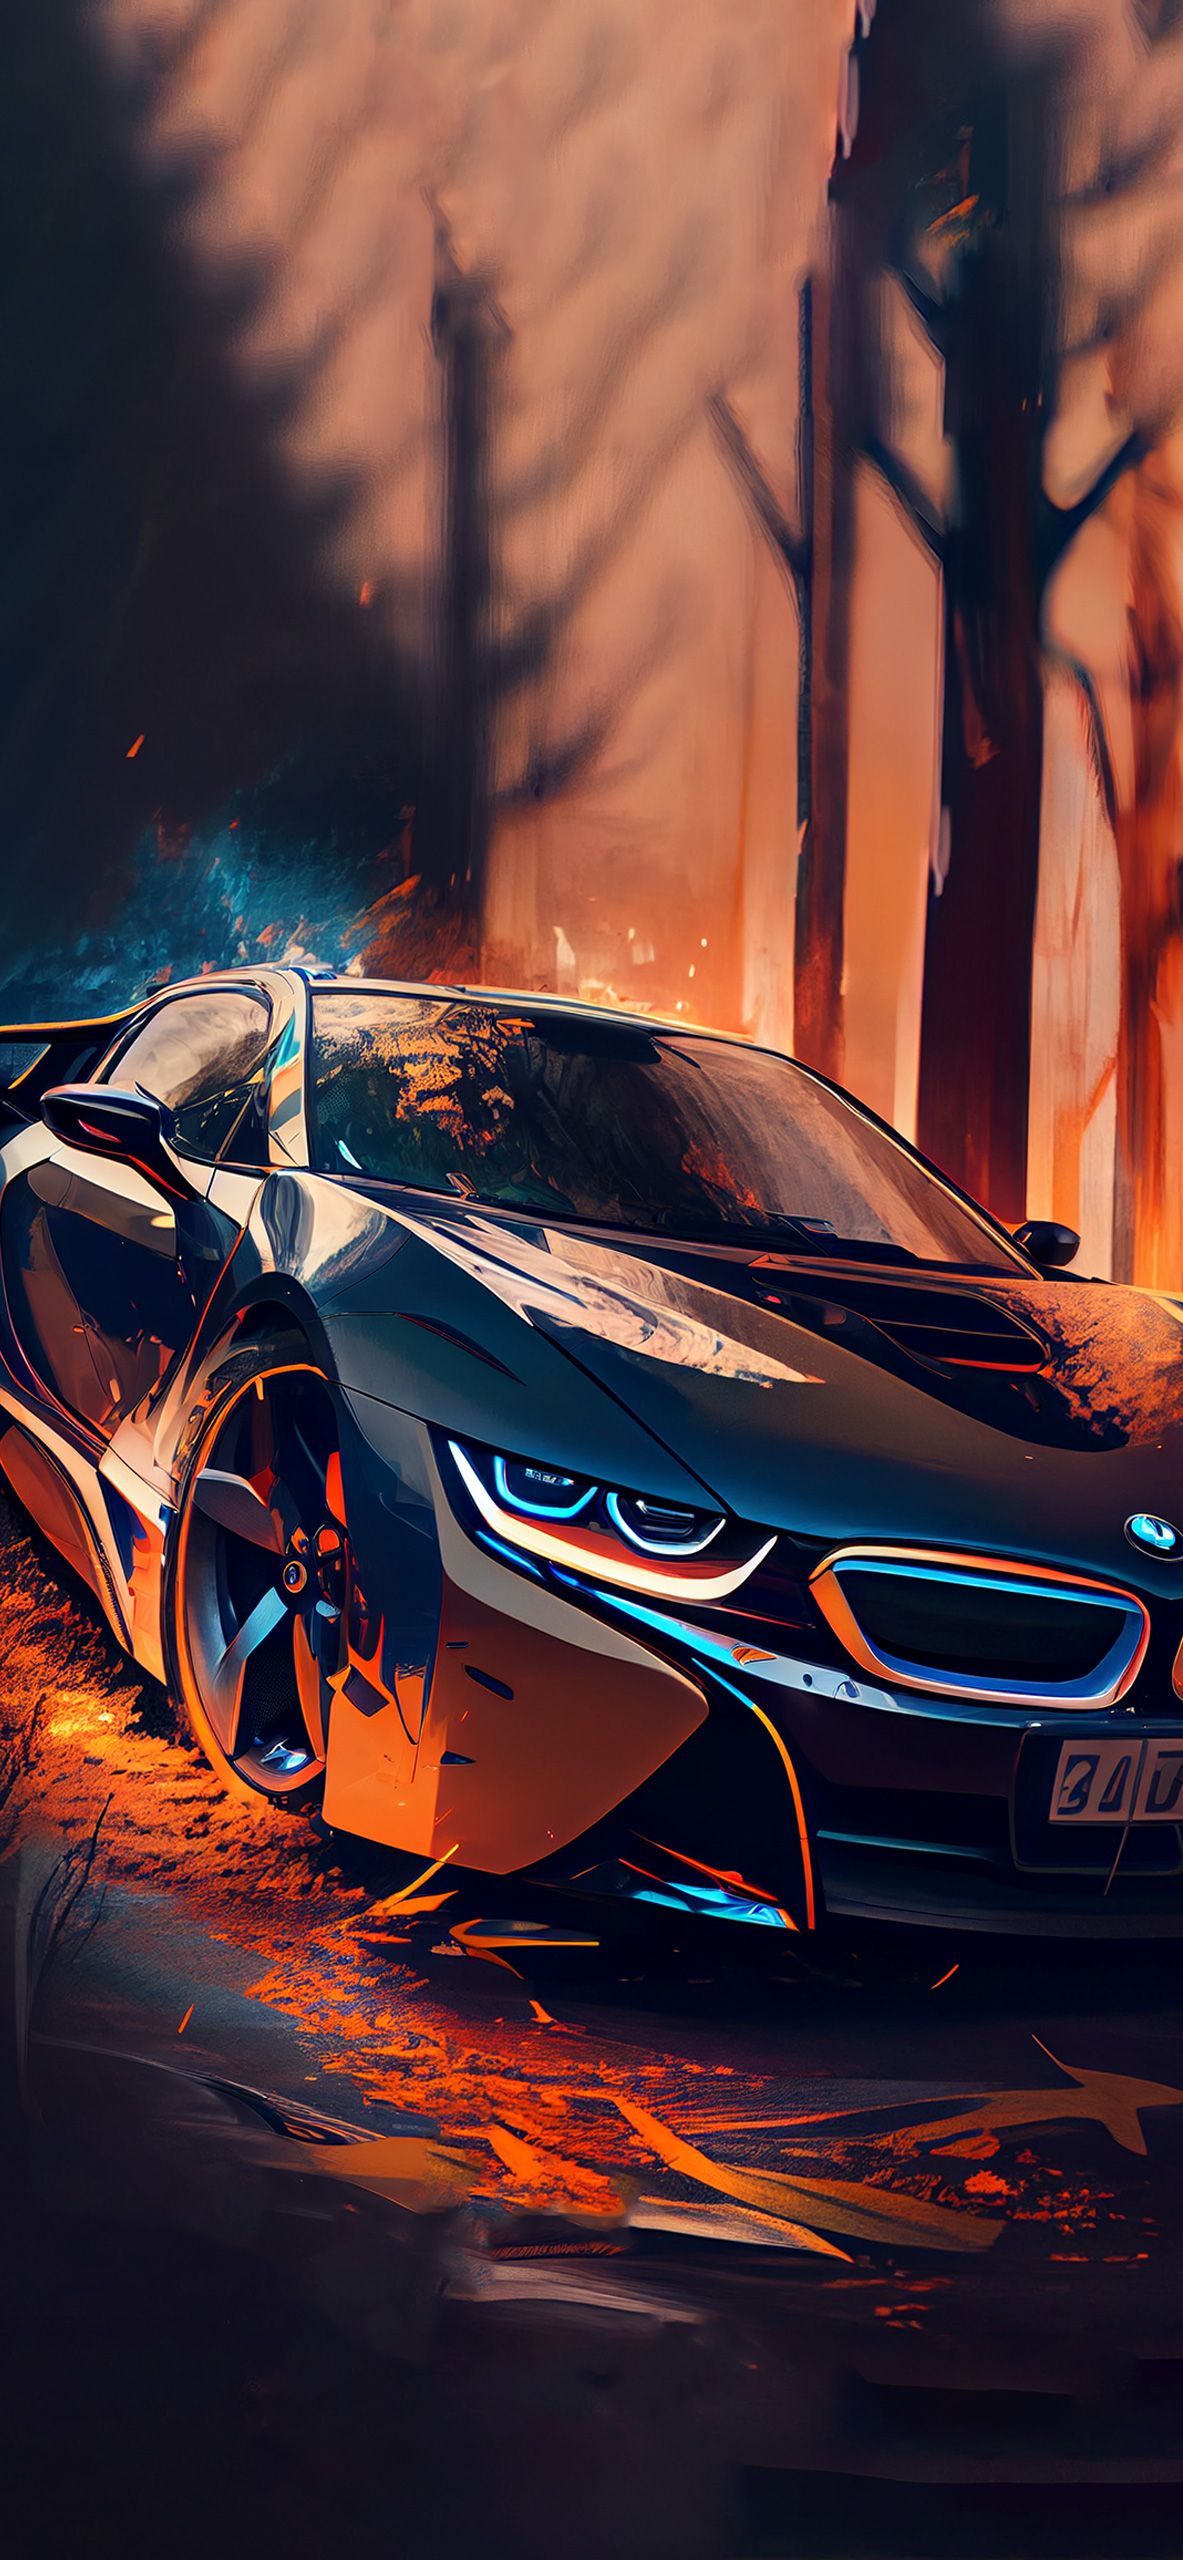 BMW i8 Wallpaper Aesthetic Wallpaper iPhone & Android